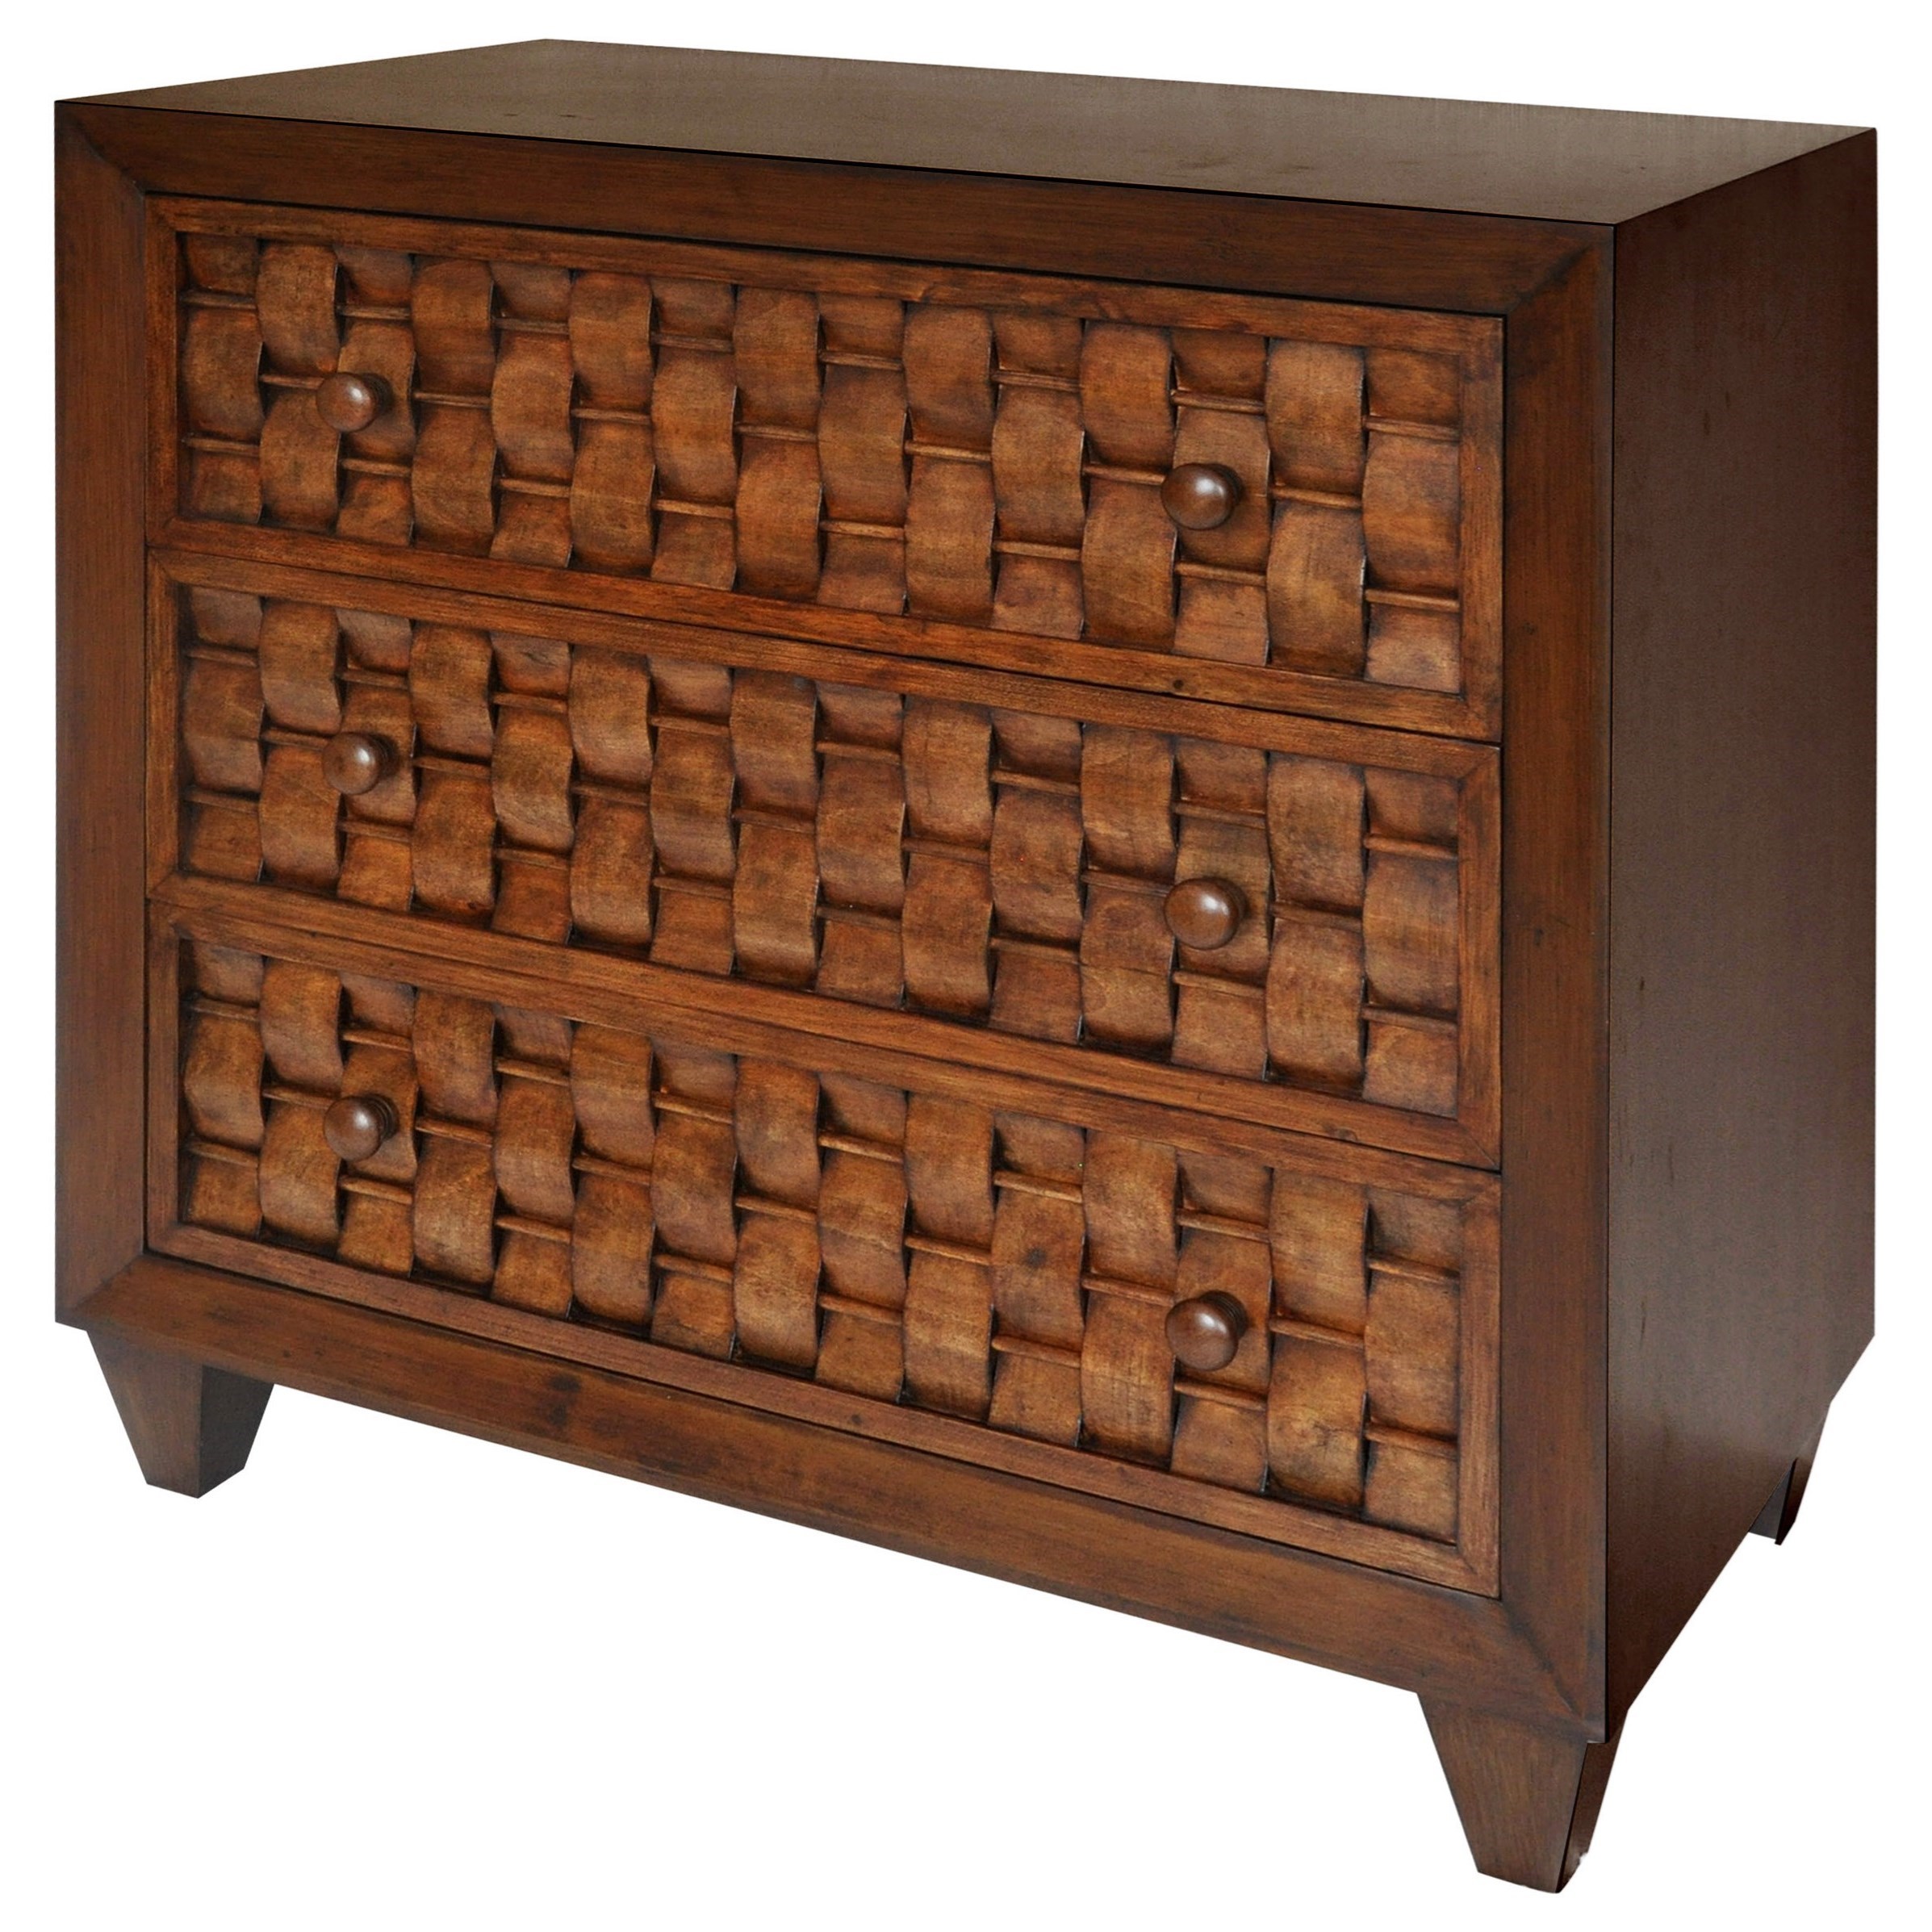 3 Drawer Cabinet with Solid Wood Woven Front